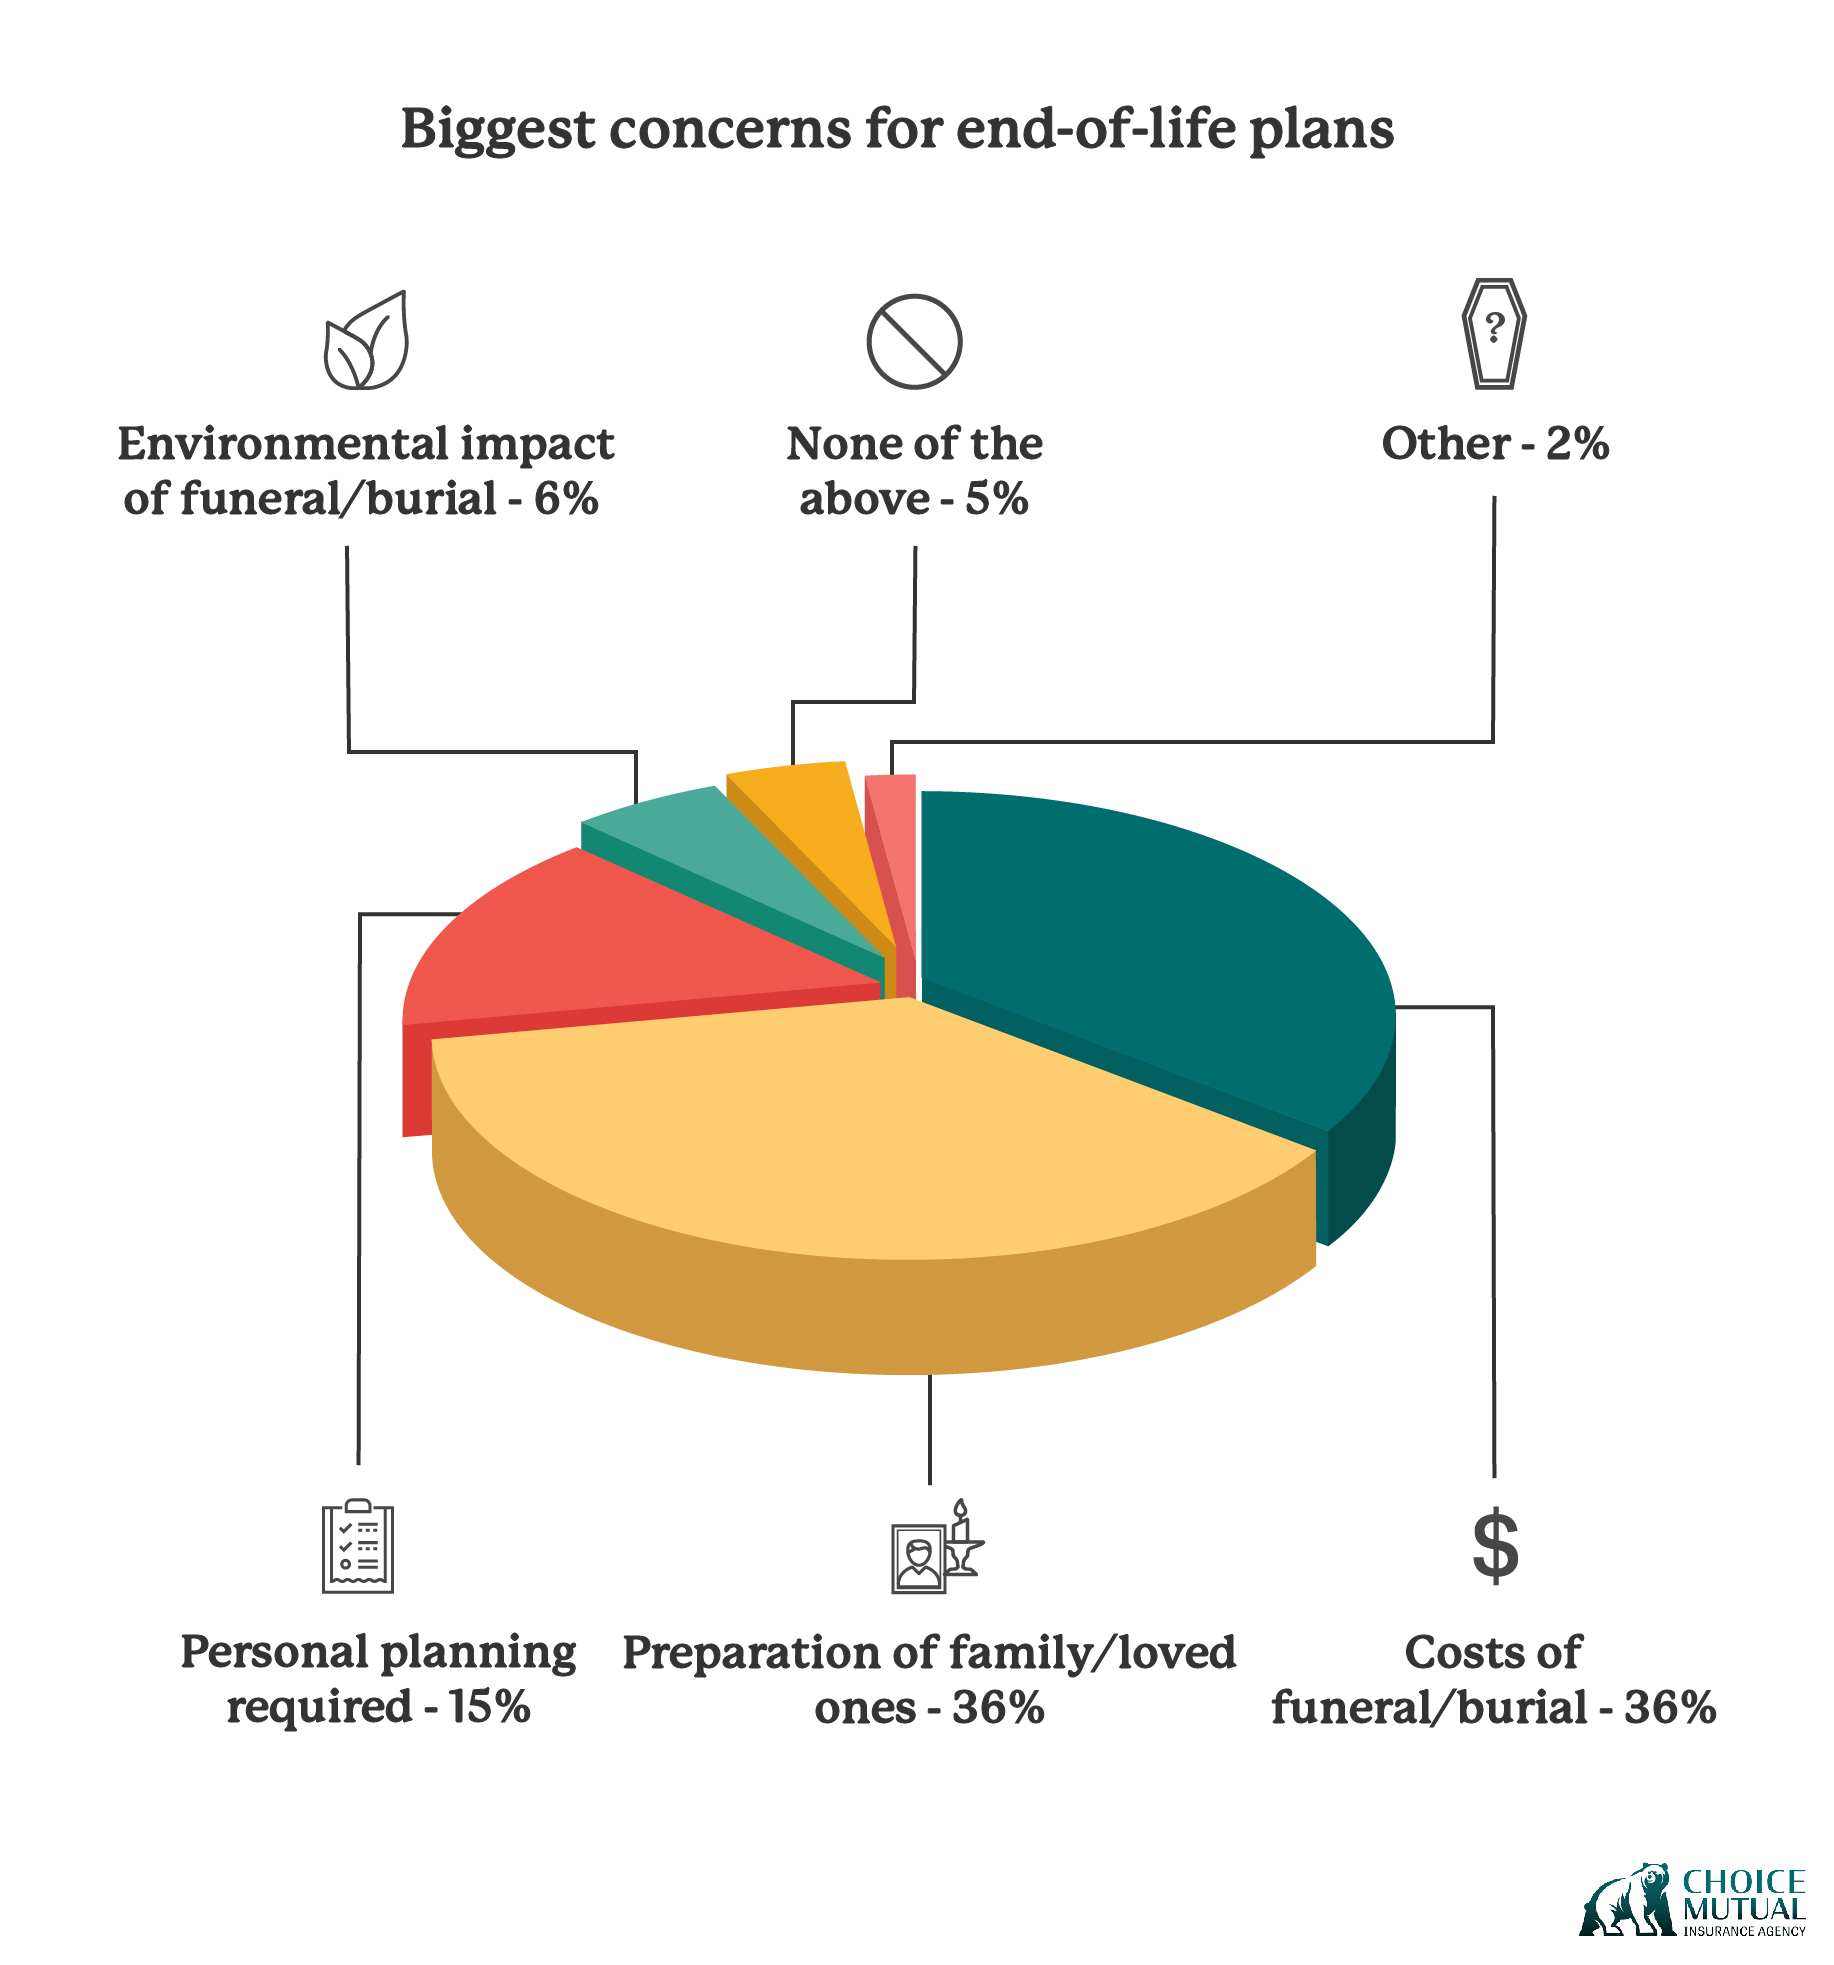 A pie chart outlining peoples greatest concerns with end-of-life planning